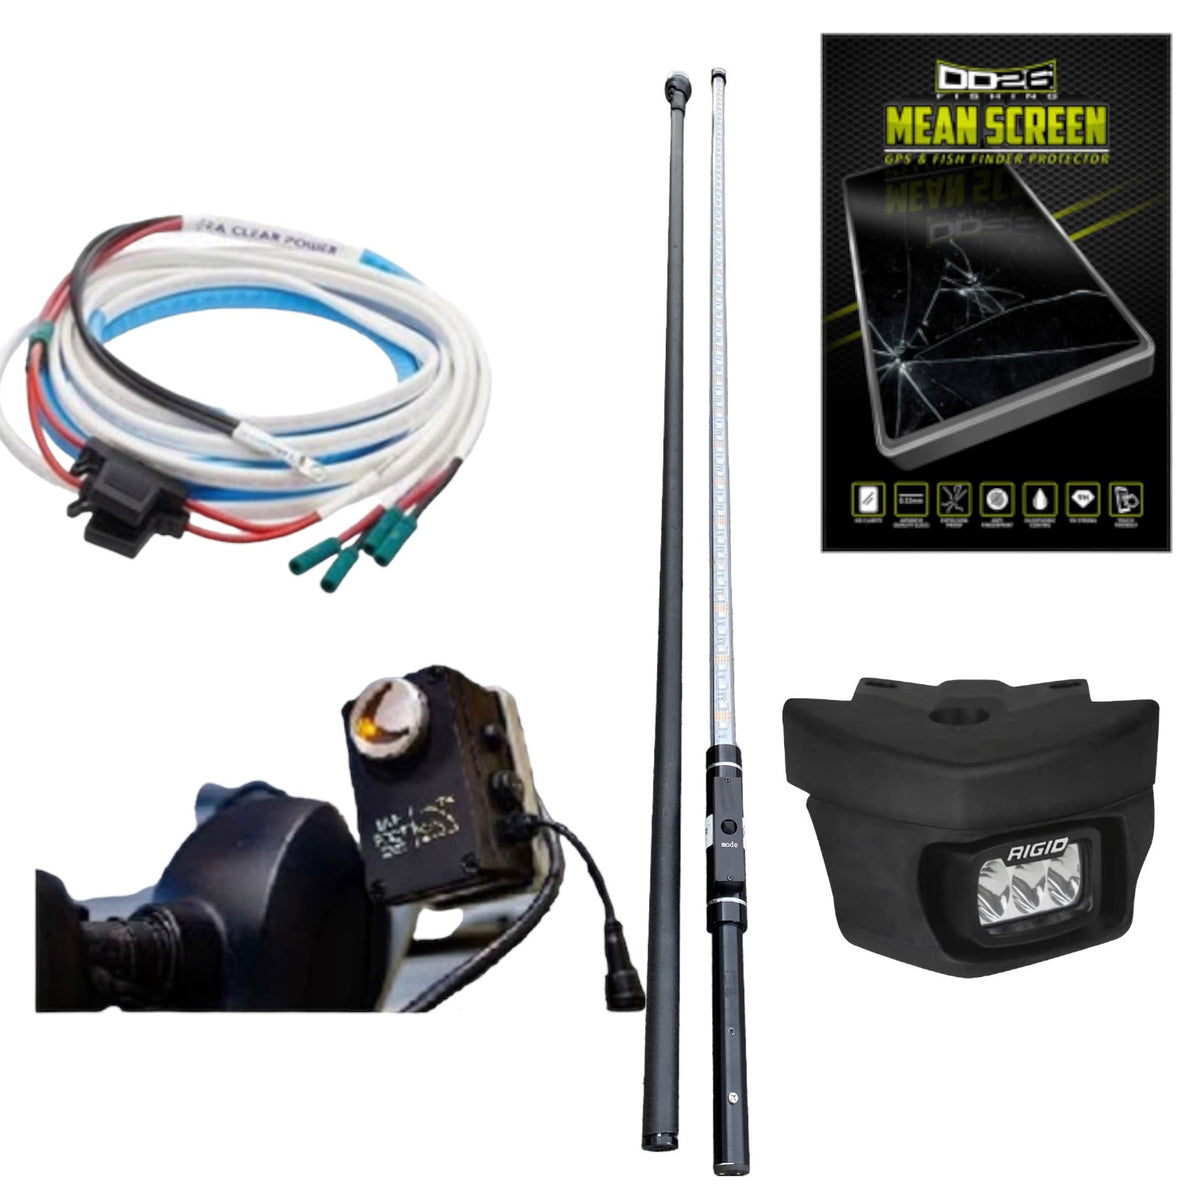 Live Foot™ - Patented Motor Control System for Sonar Transducers by Bl –  DD26 Fishing